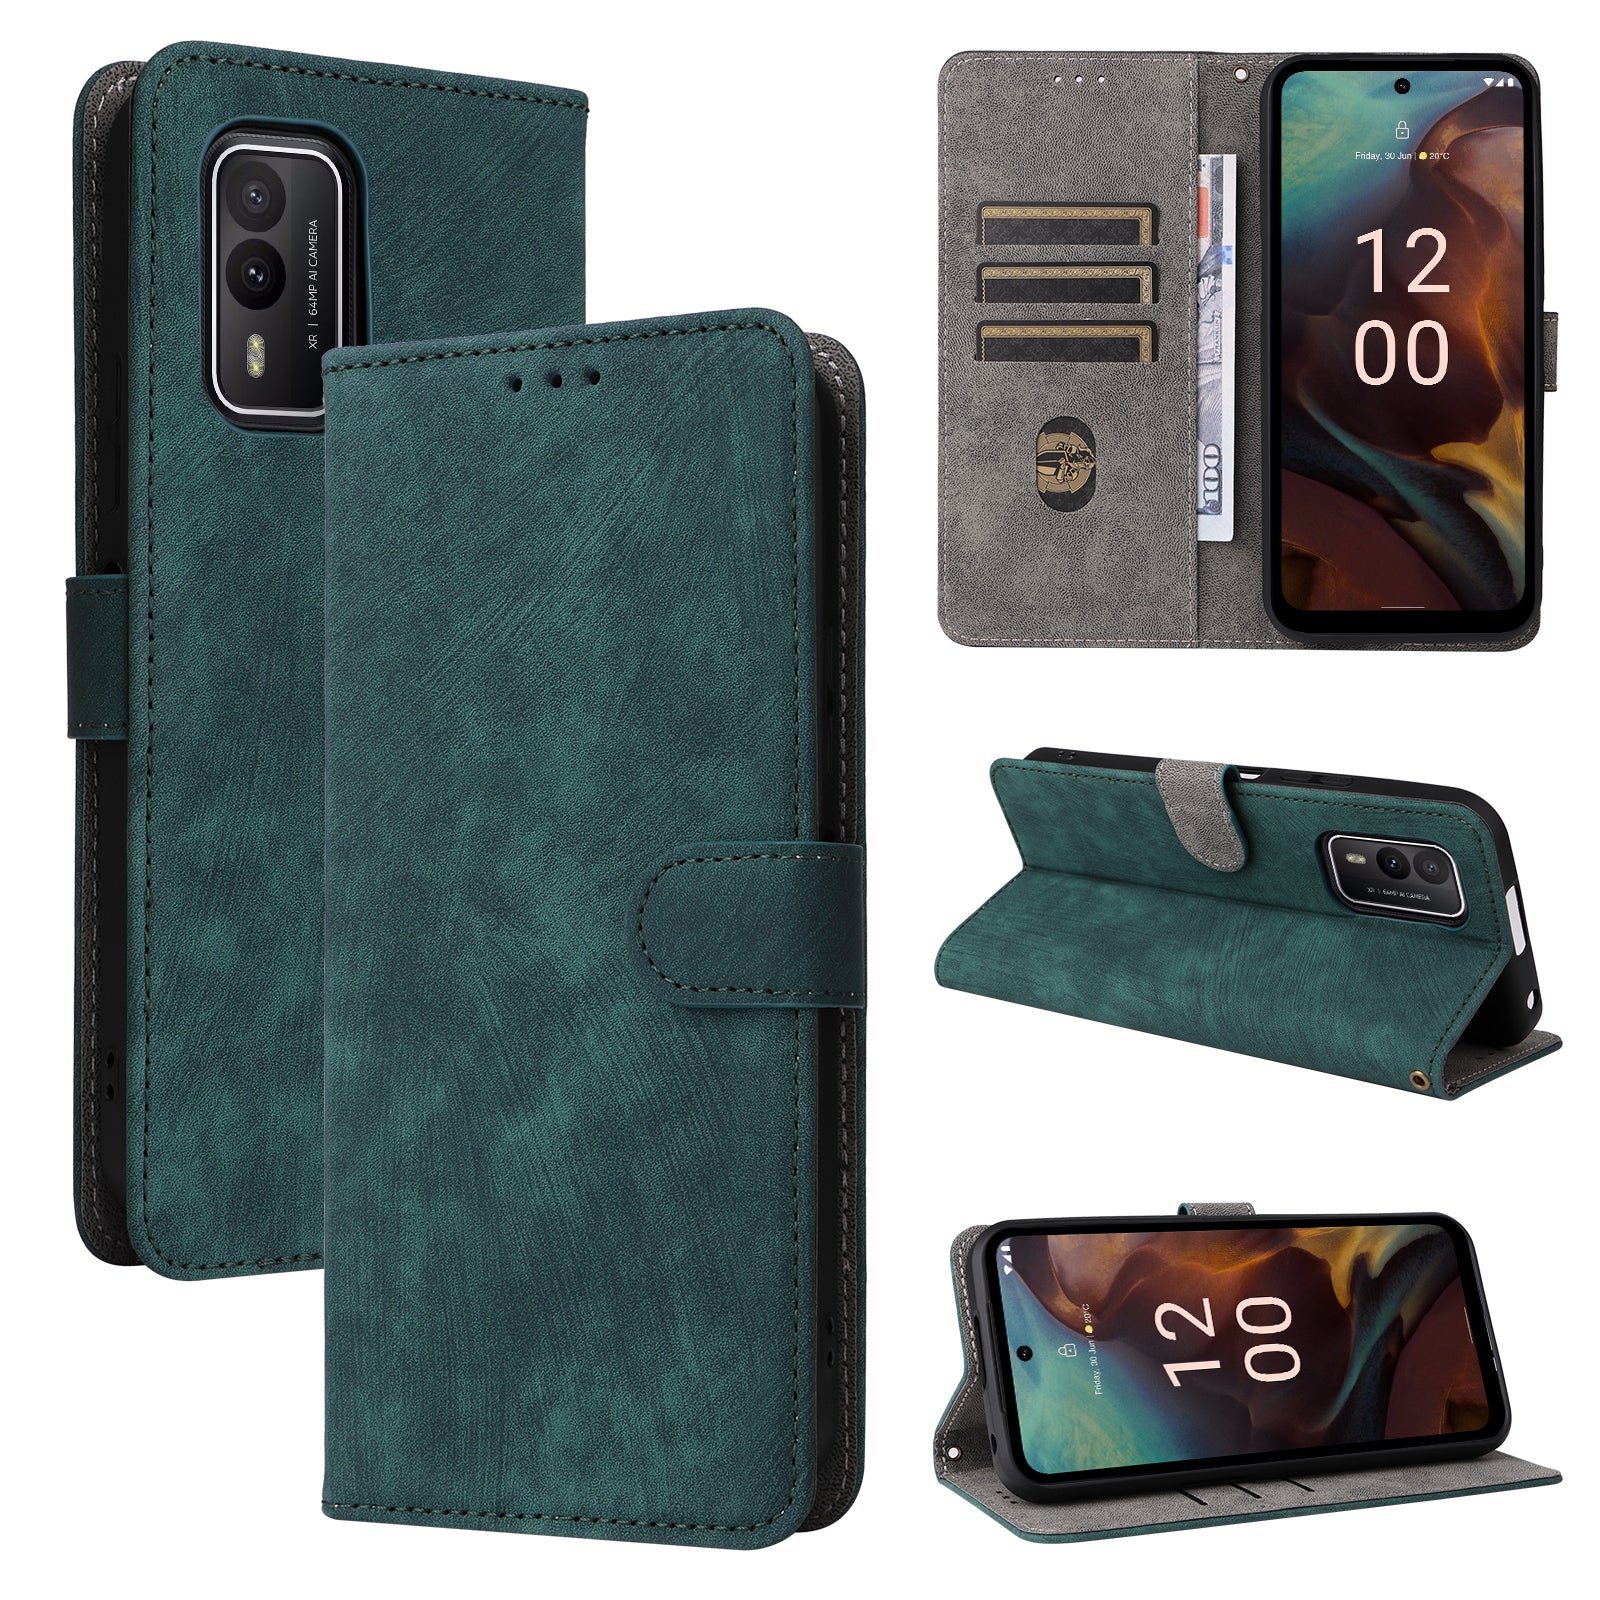 Uniqkart for Nokia XR21 RFID Blocking Phone Cover Wallet Stand Shell Shockproof Leather Case - Green